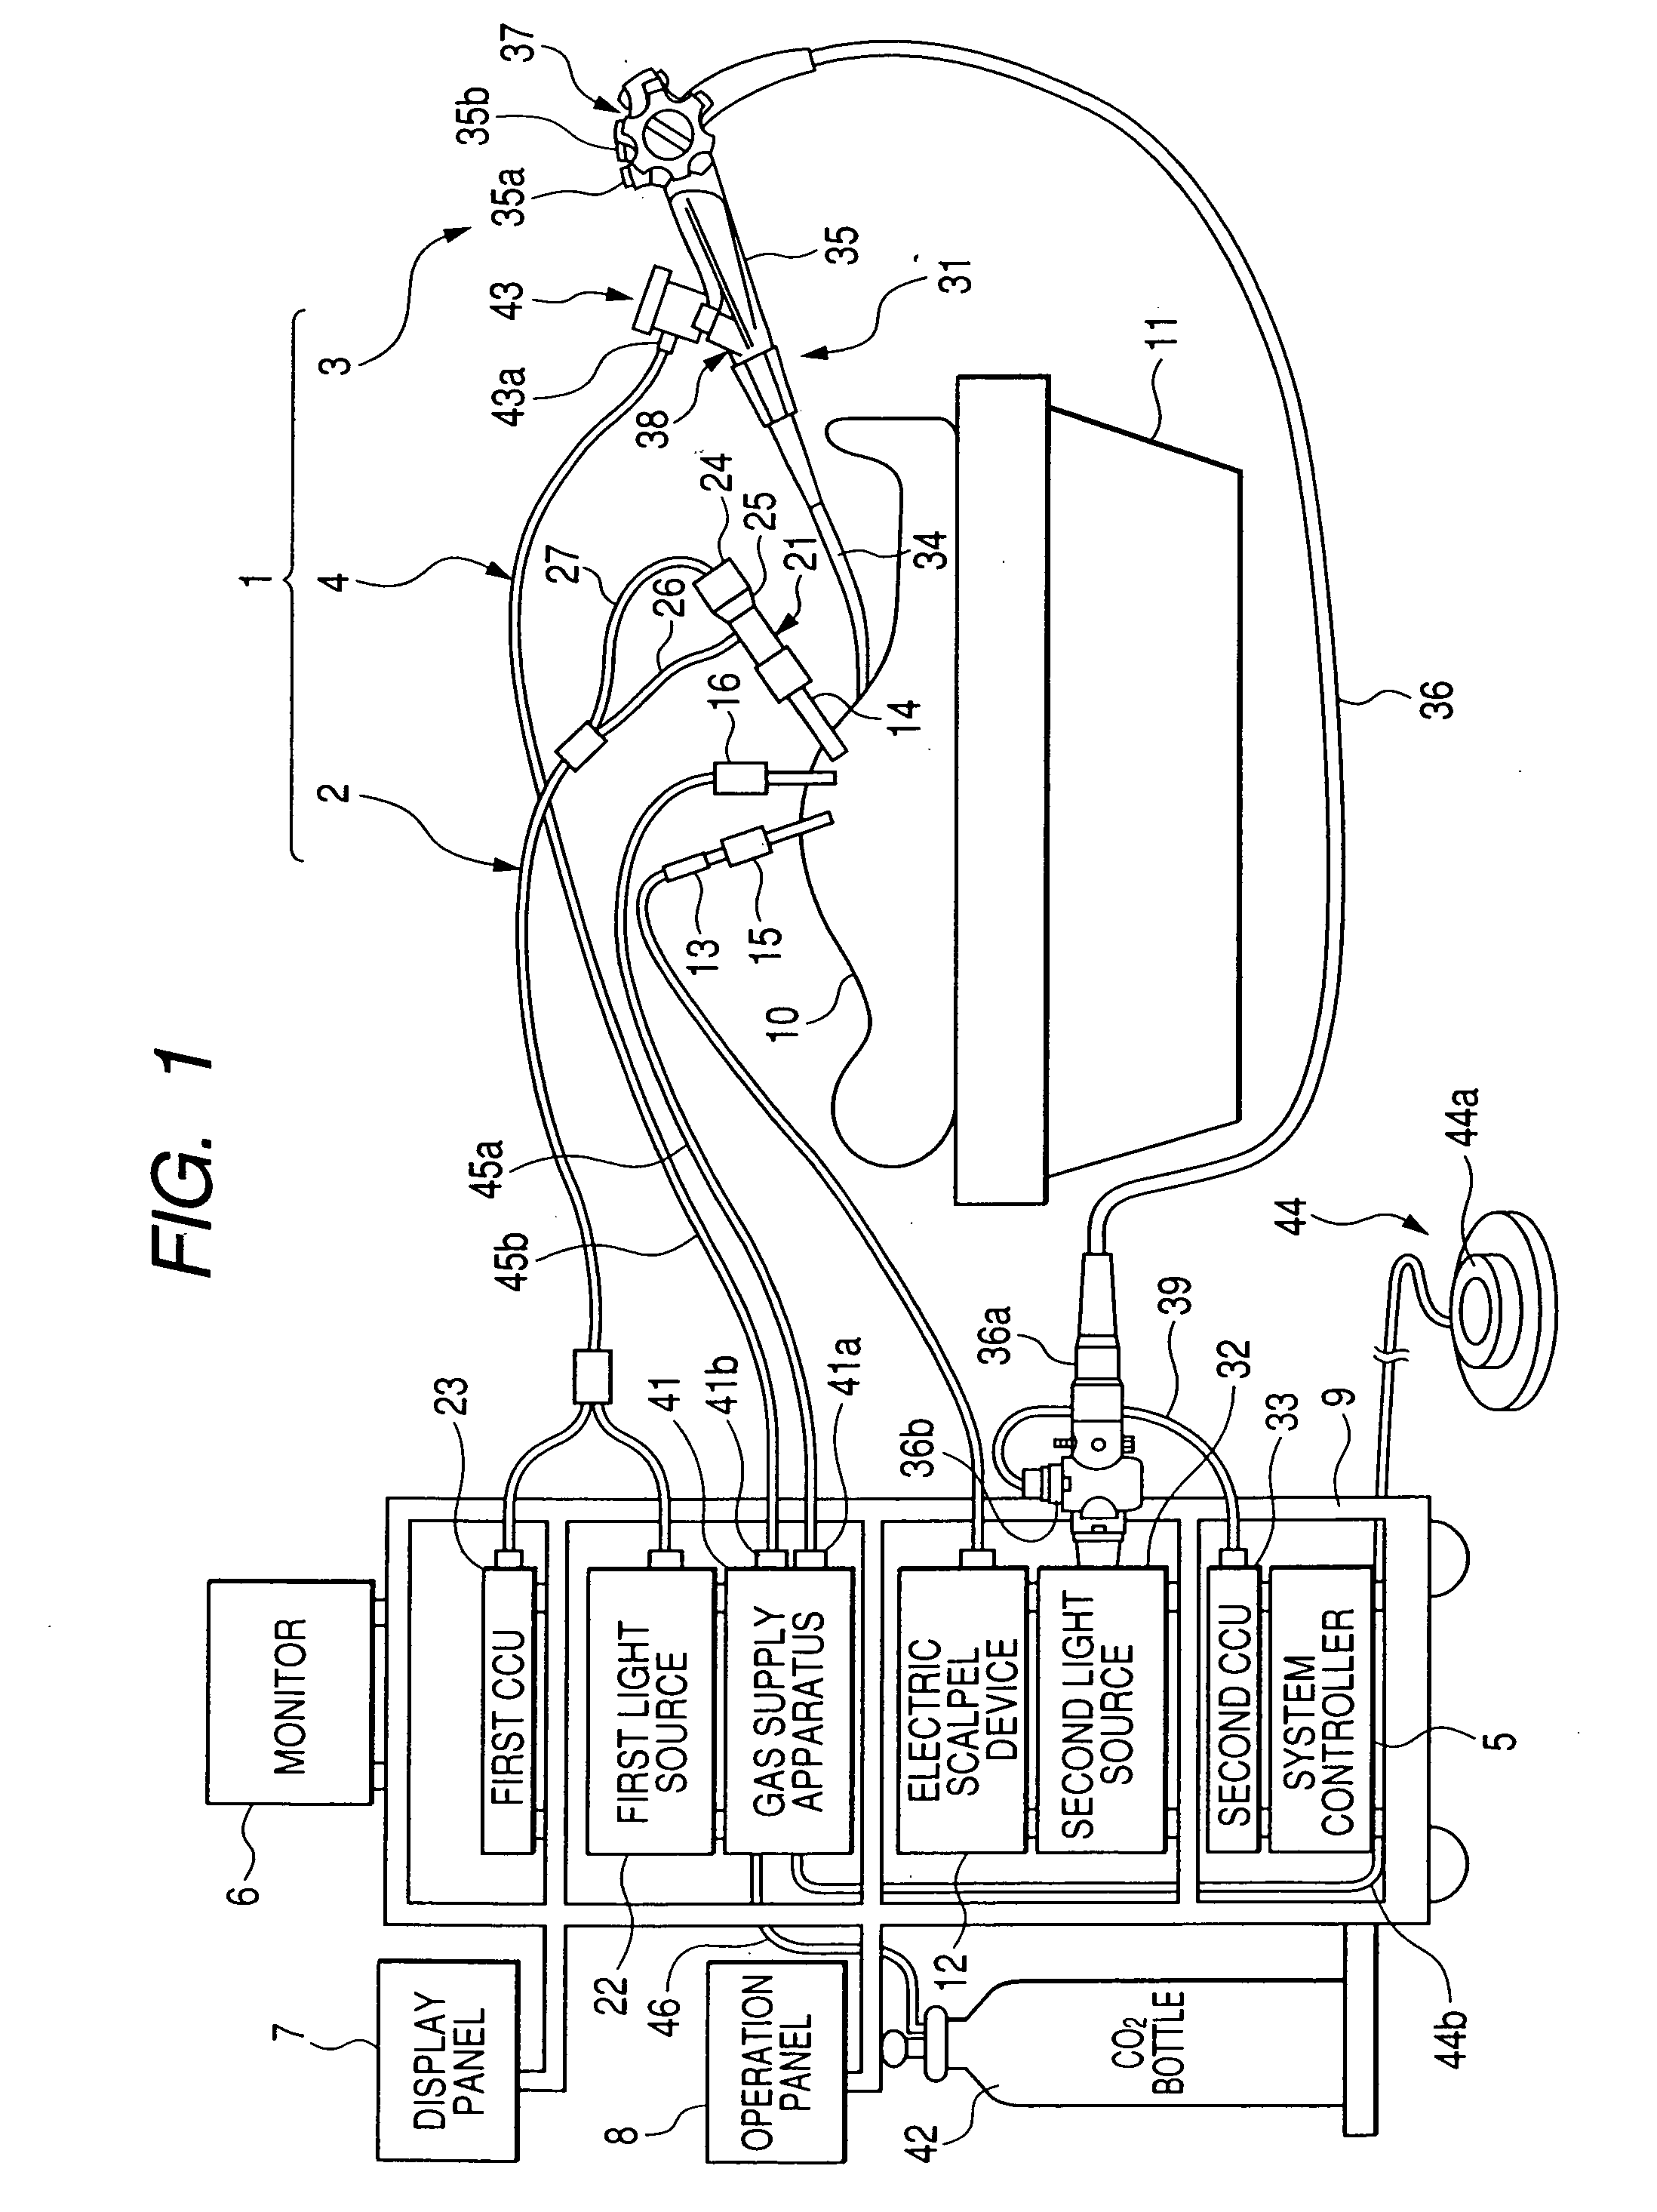 Method and system for supplying predetermined gas into body cavities of a specimen